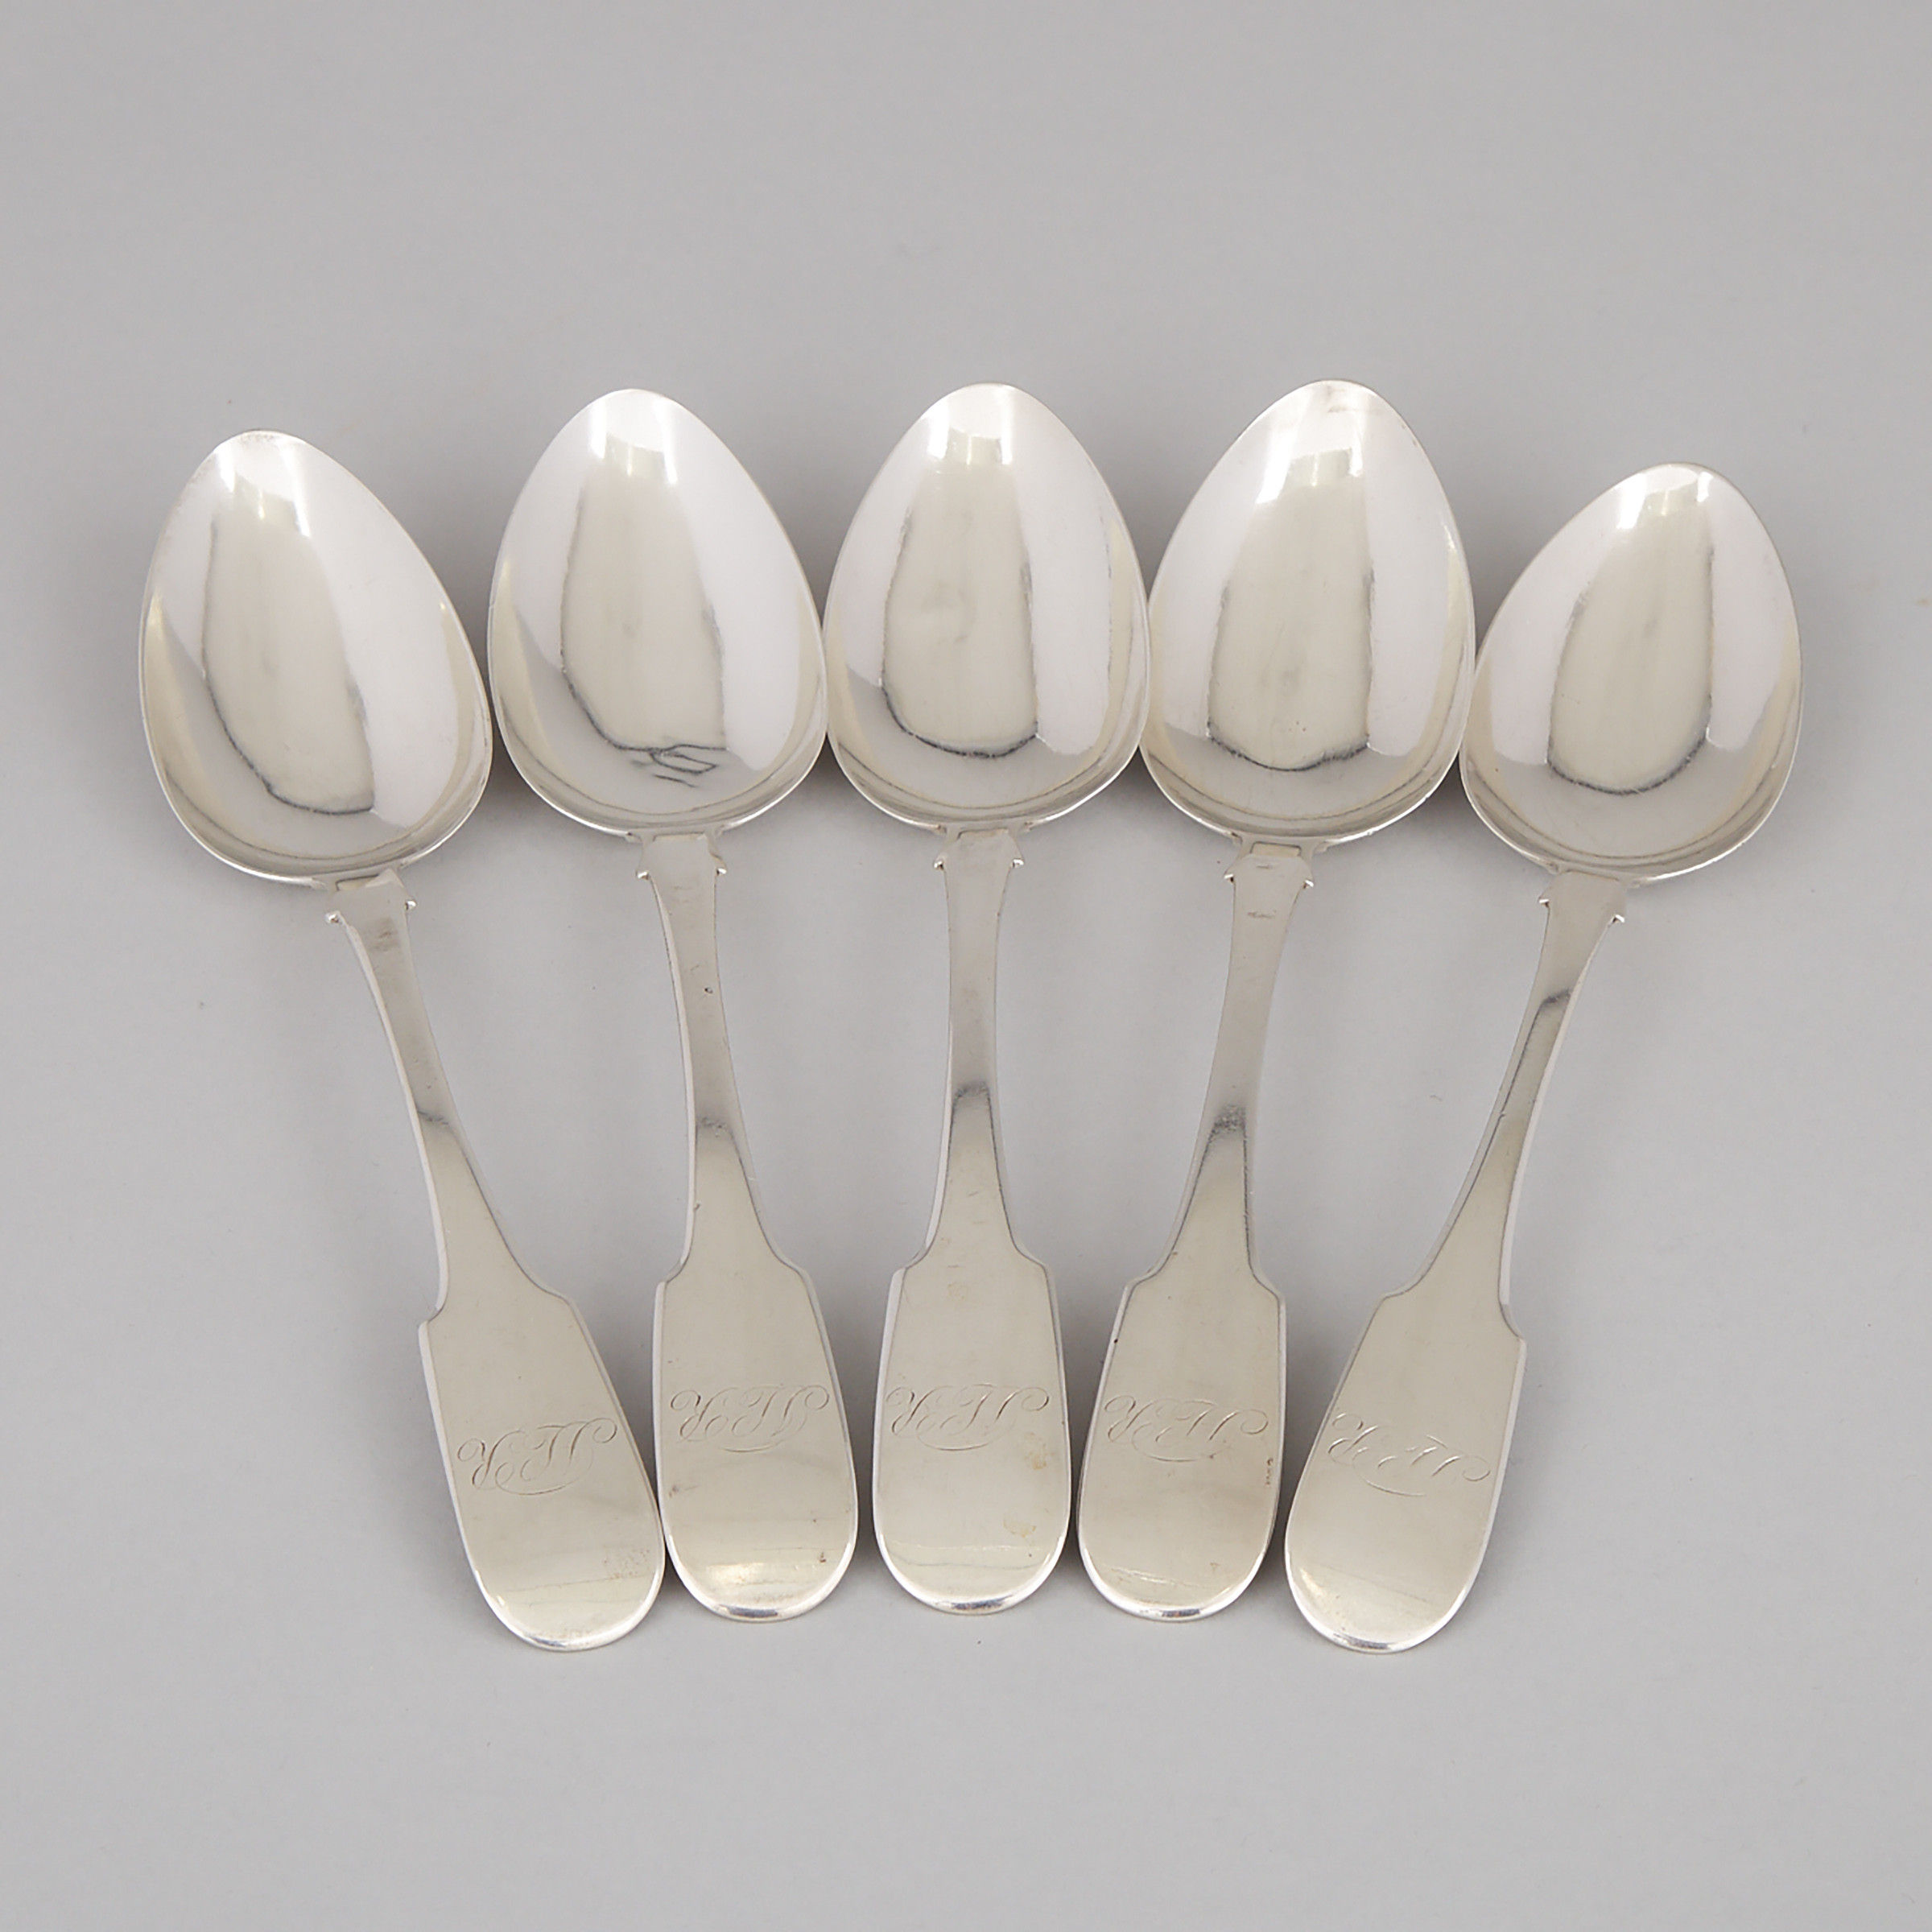 Five Canadian Silver Fiddle Pattern Table Spoons, Peter Bohle, Montreal, Que., c.1820